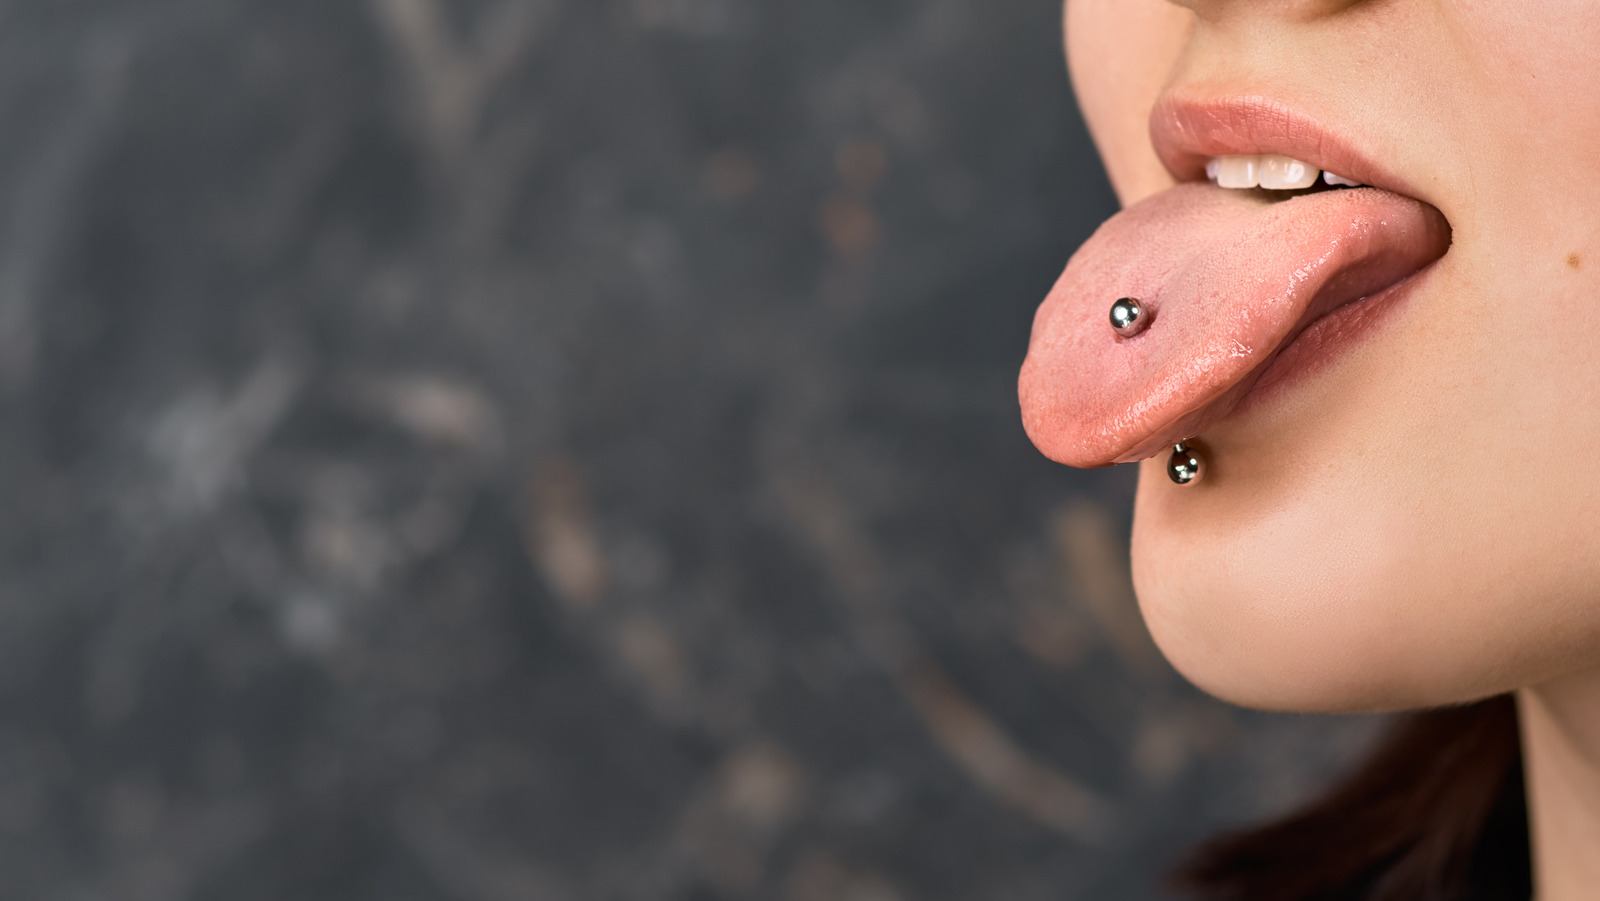 capsule paus Matroos What Your Tongue Piercing Says About You